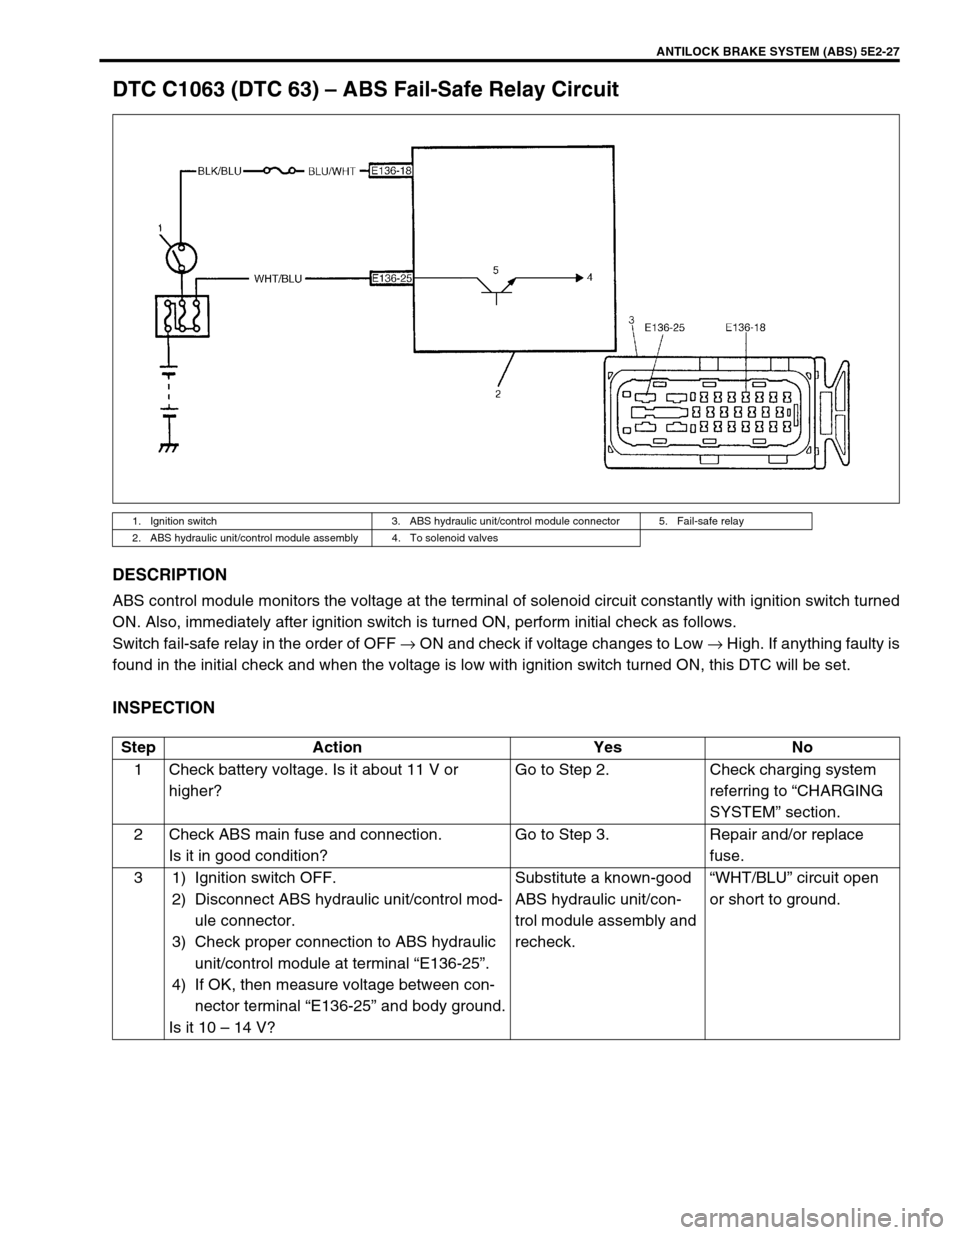 SUZUKI GRAND VITARA 2001 2.G Owners Manual ANTILOCK BRAKE SYSTEM (ABS) 5E2-27
DTC C1063 (DTC 63) – ABS Fail-Safe Relay Circuit
DESCRIPTION
ABS control module monitors the voltage at the terminal of solenoid circuit constantly with ignition s